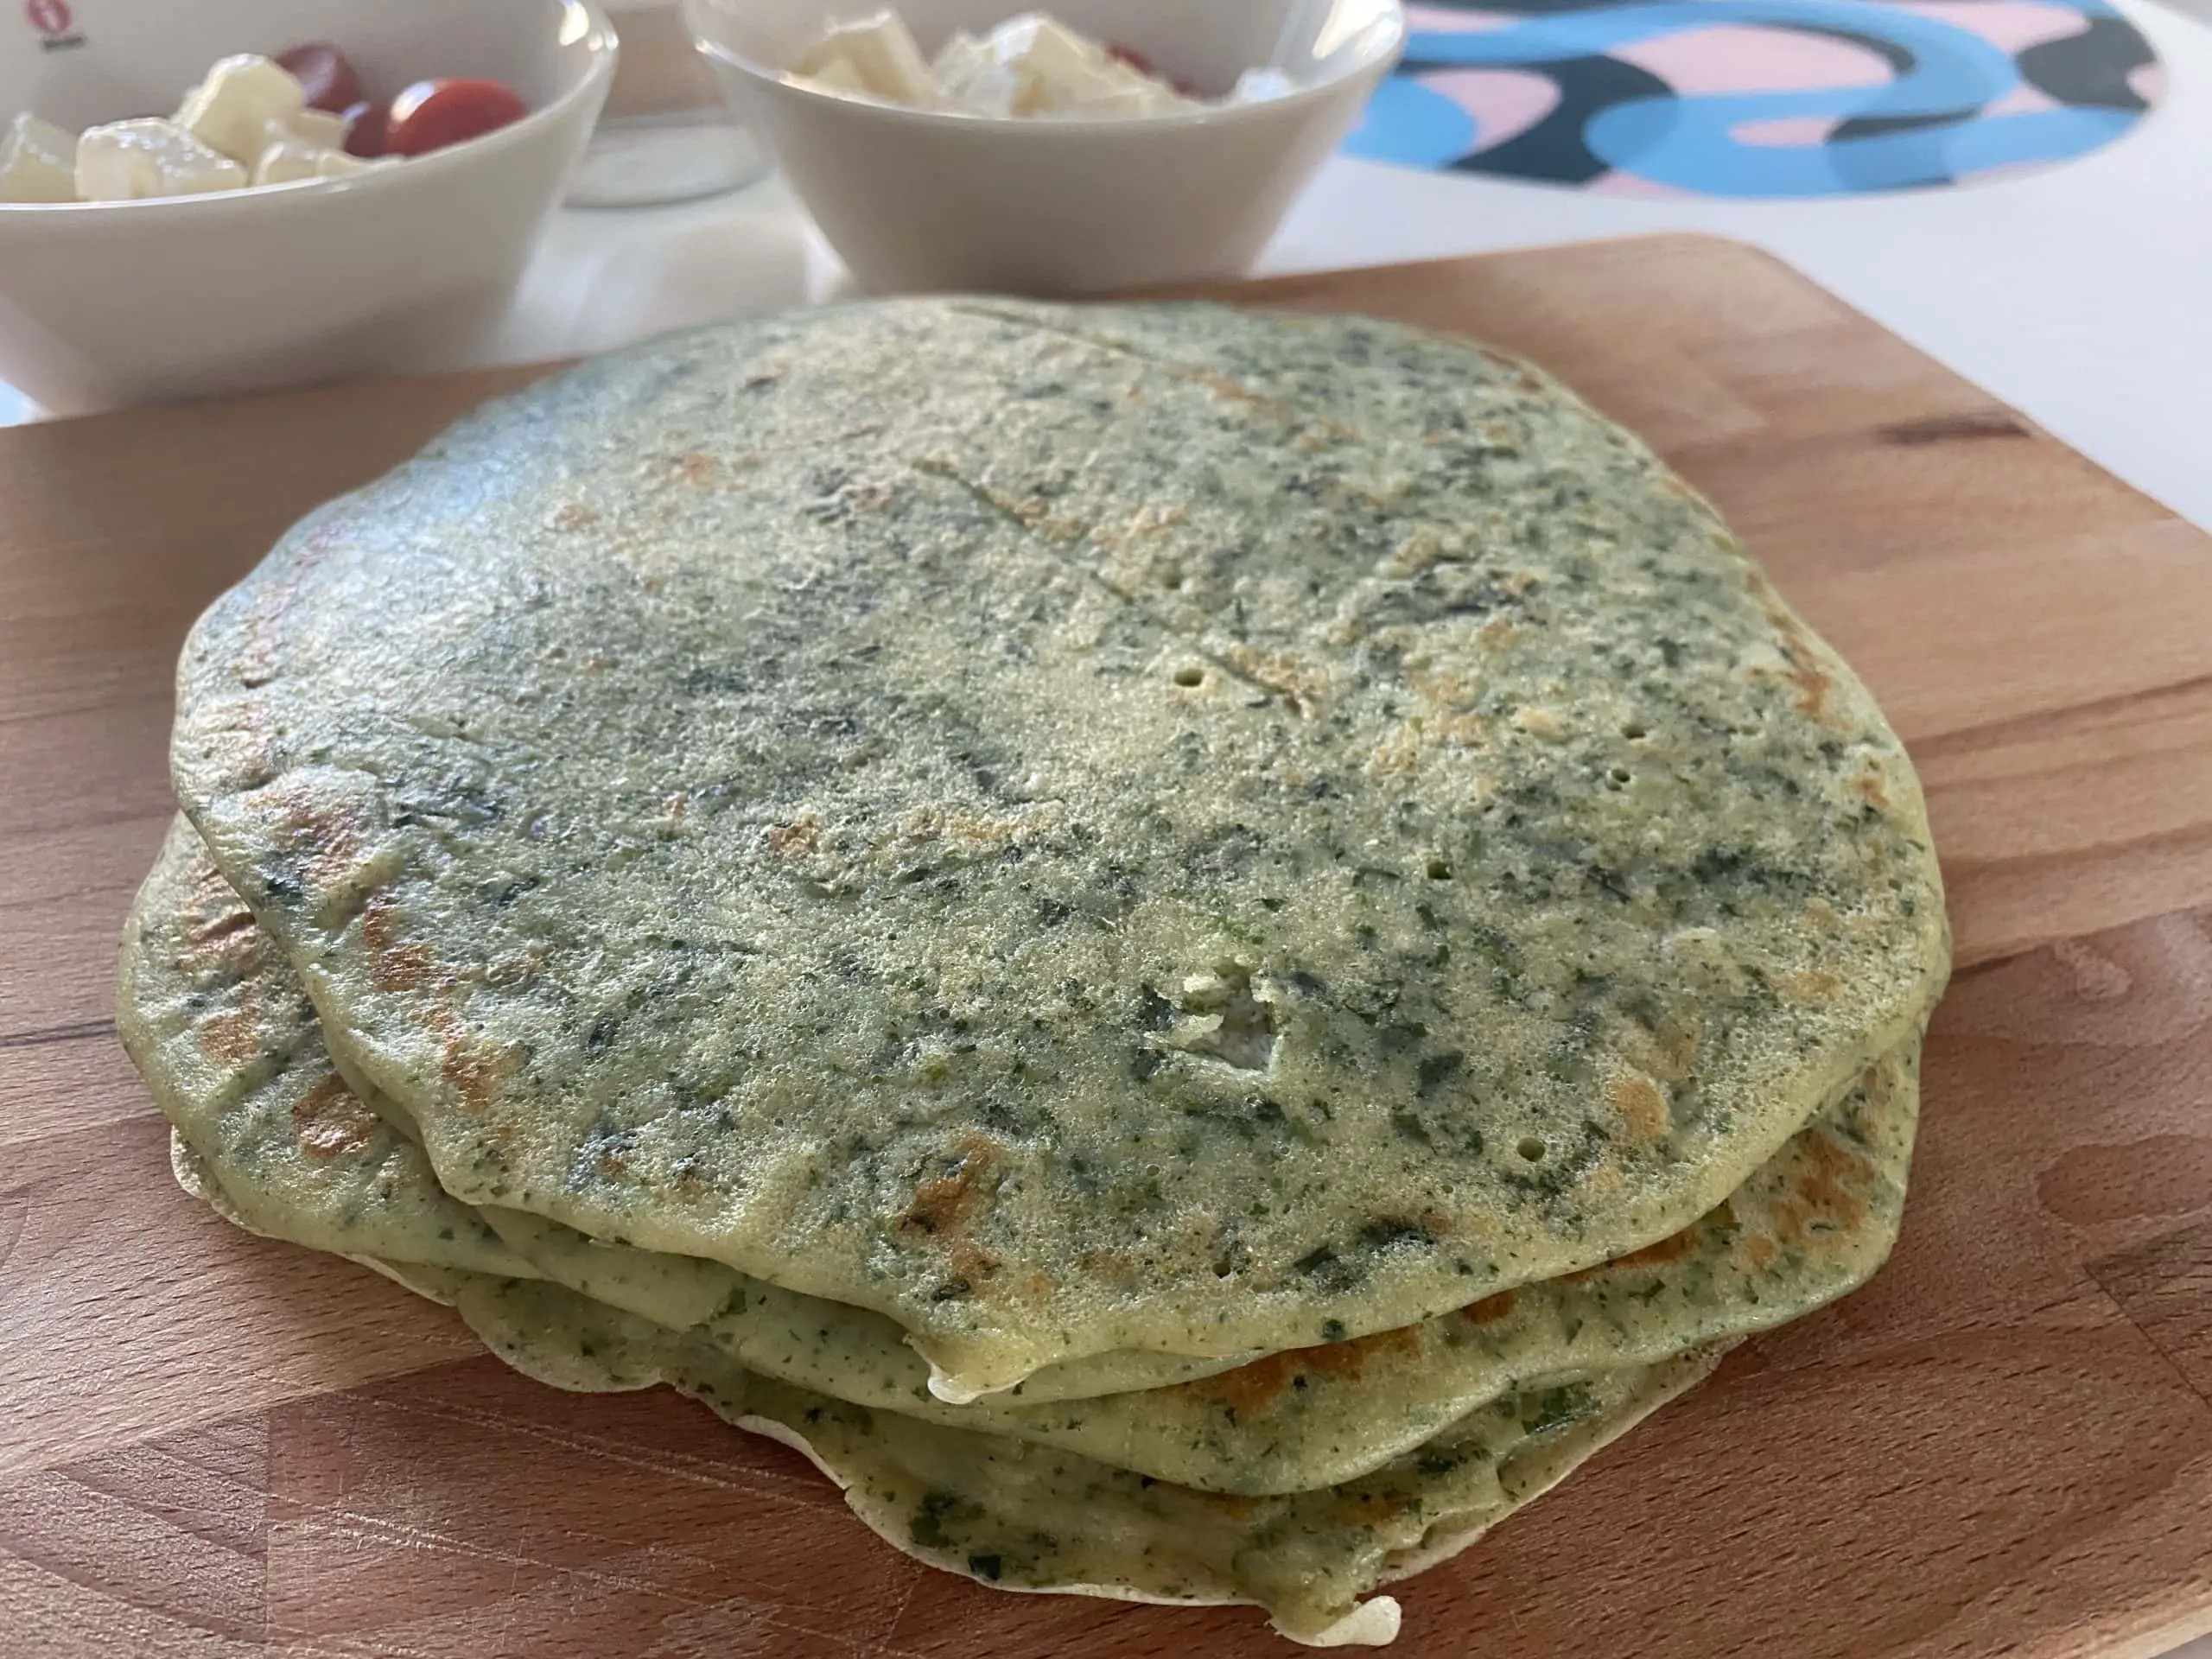 Finnish spinach pancakes